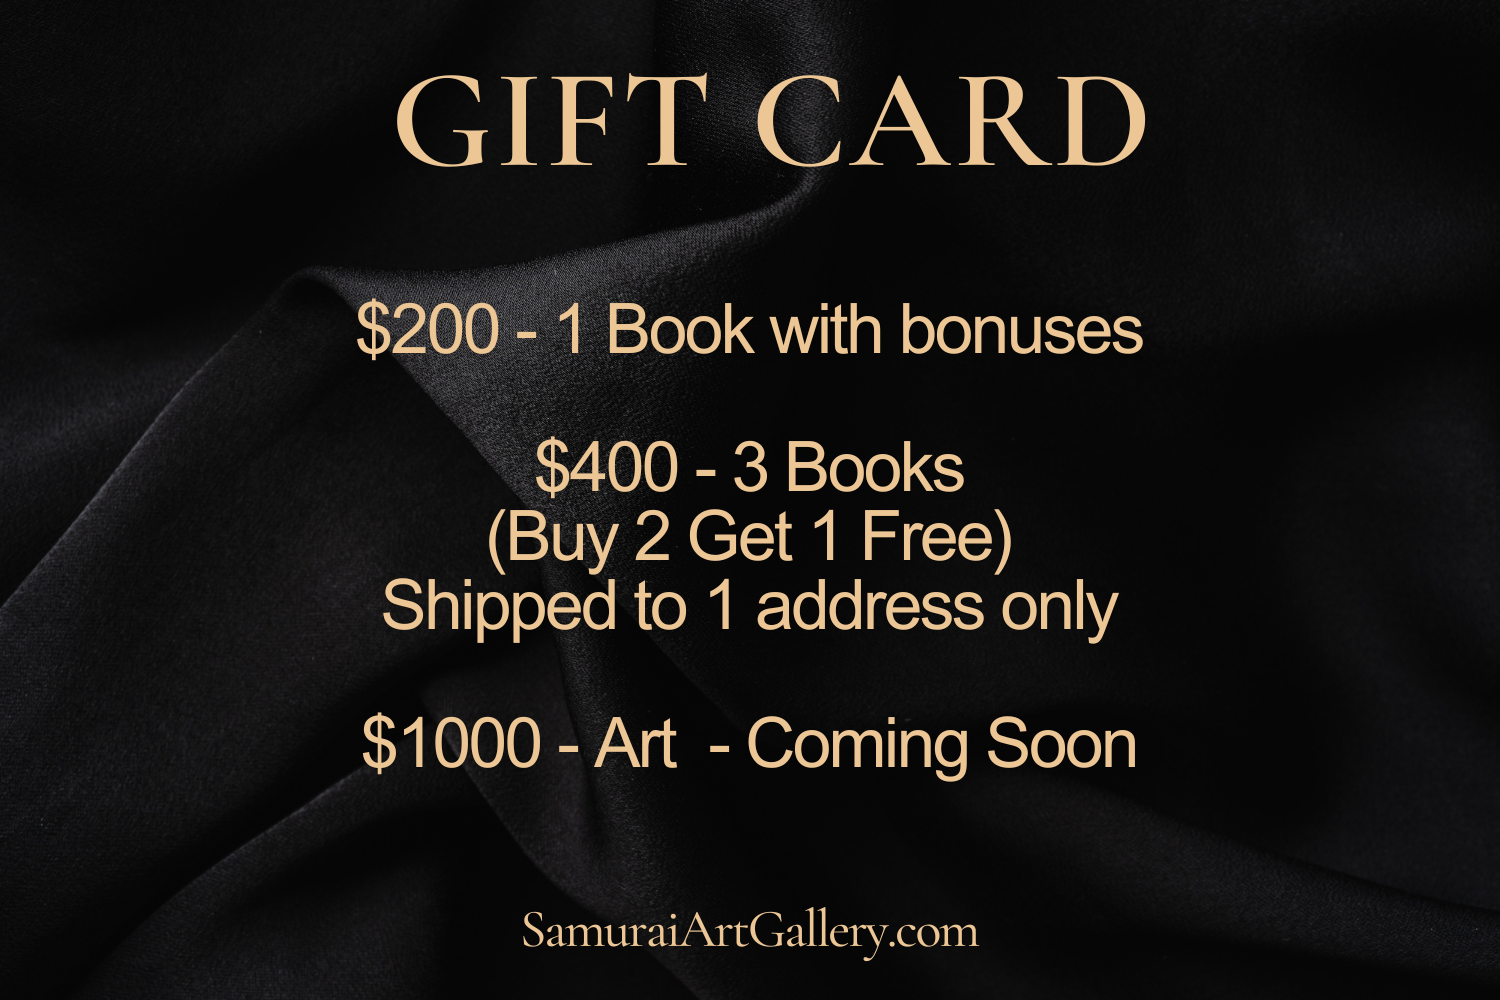 Gift card - Limited Edition Book